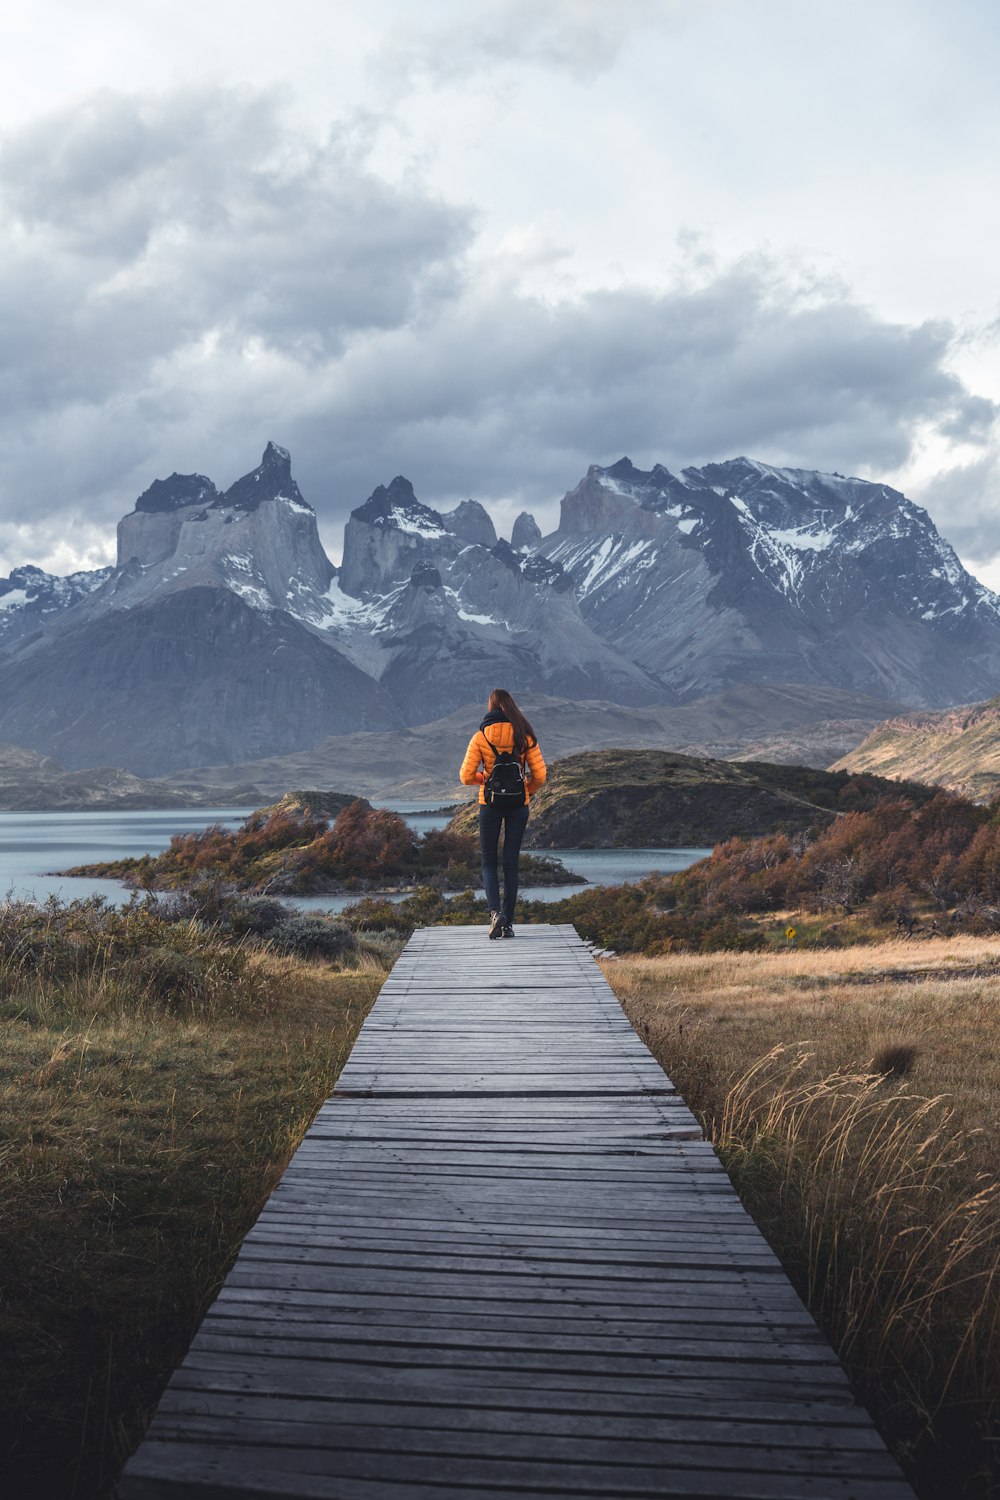 a person walking down a wooden walkway towards mountains